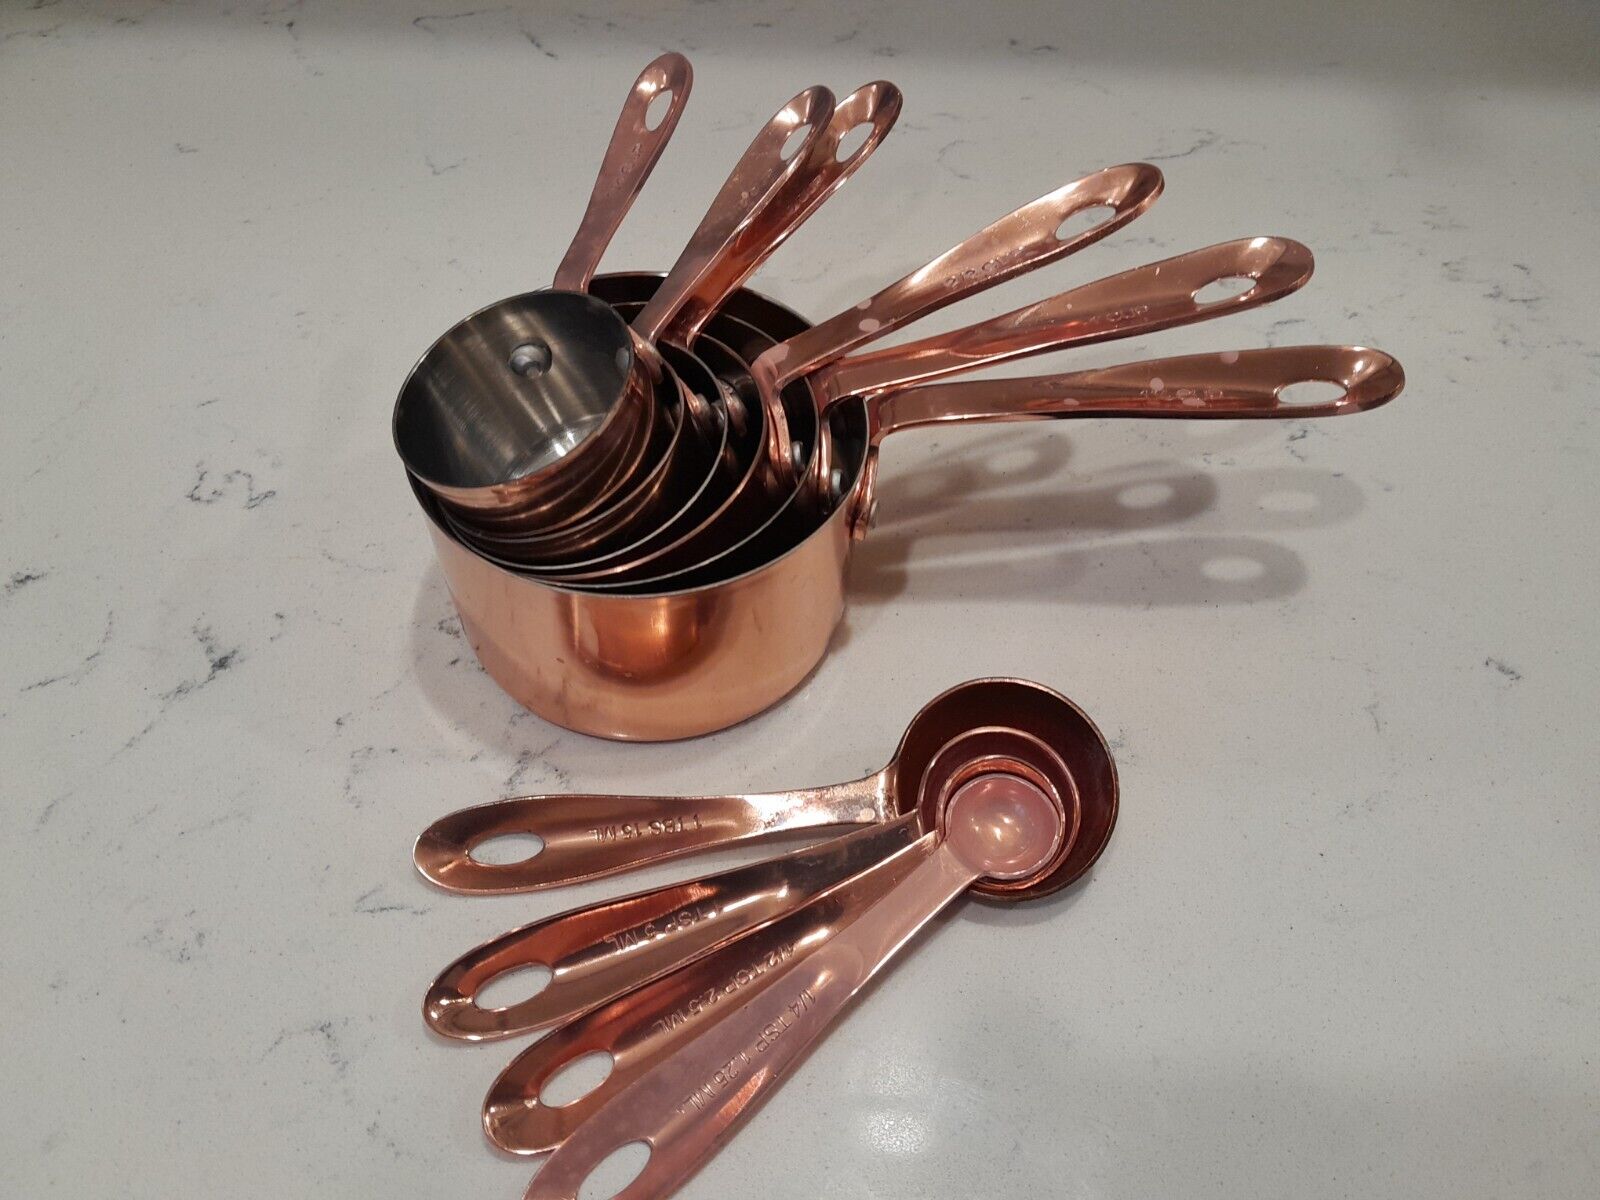 Huge Vintage 10 Pc Copper And Stainless Steel Nesting Measuring Cups & Spoons